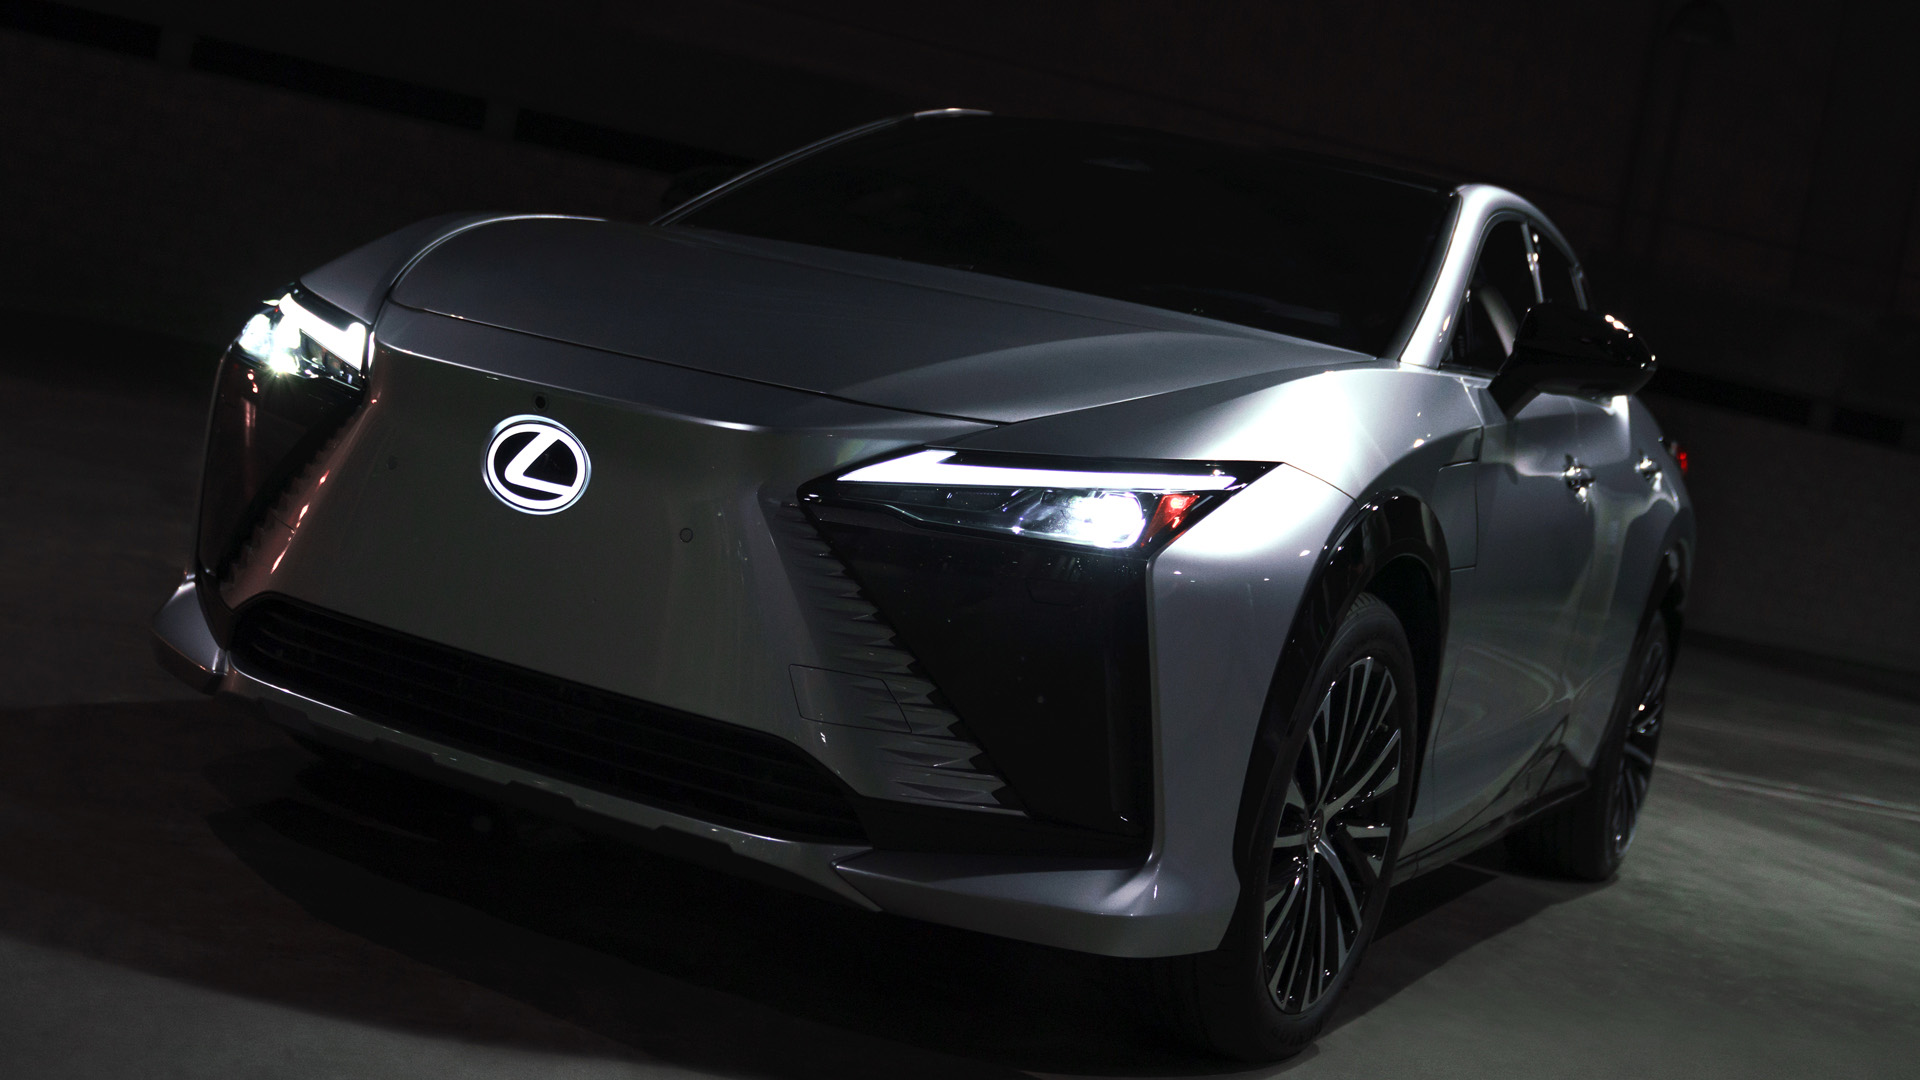 Front view of the Lexus RZ 450e